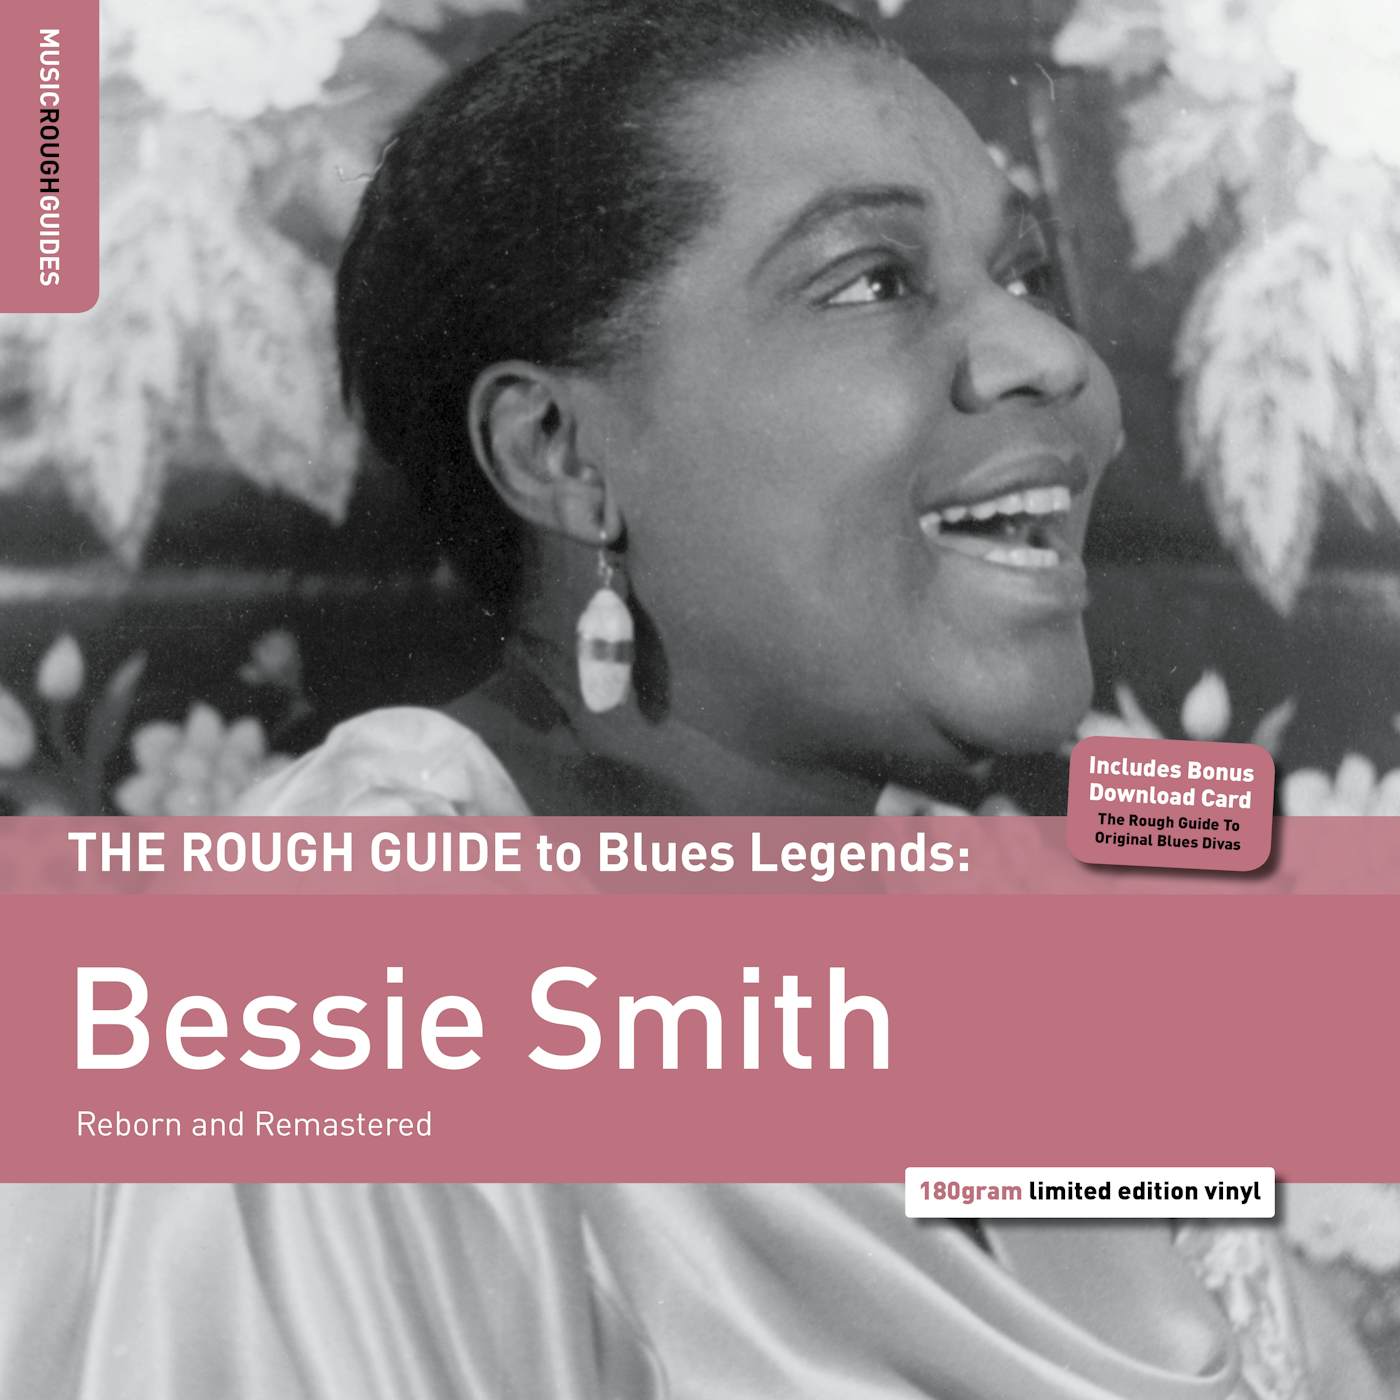 Rough Guide To Bessie Smith Vinyl Record